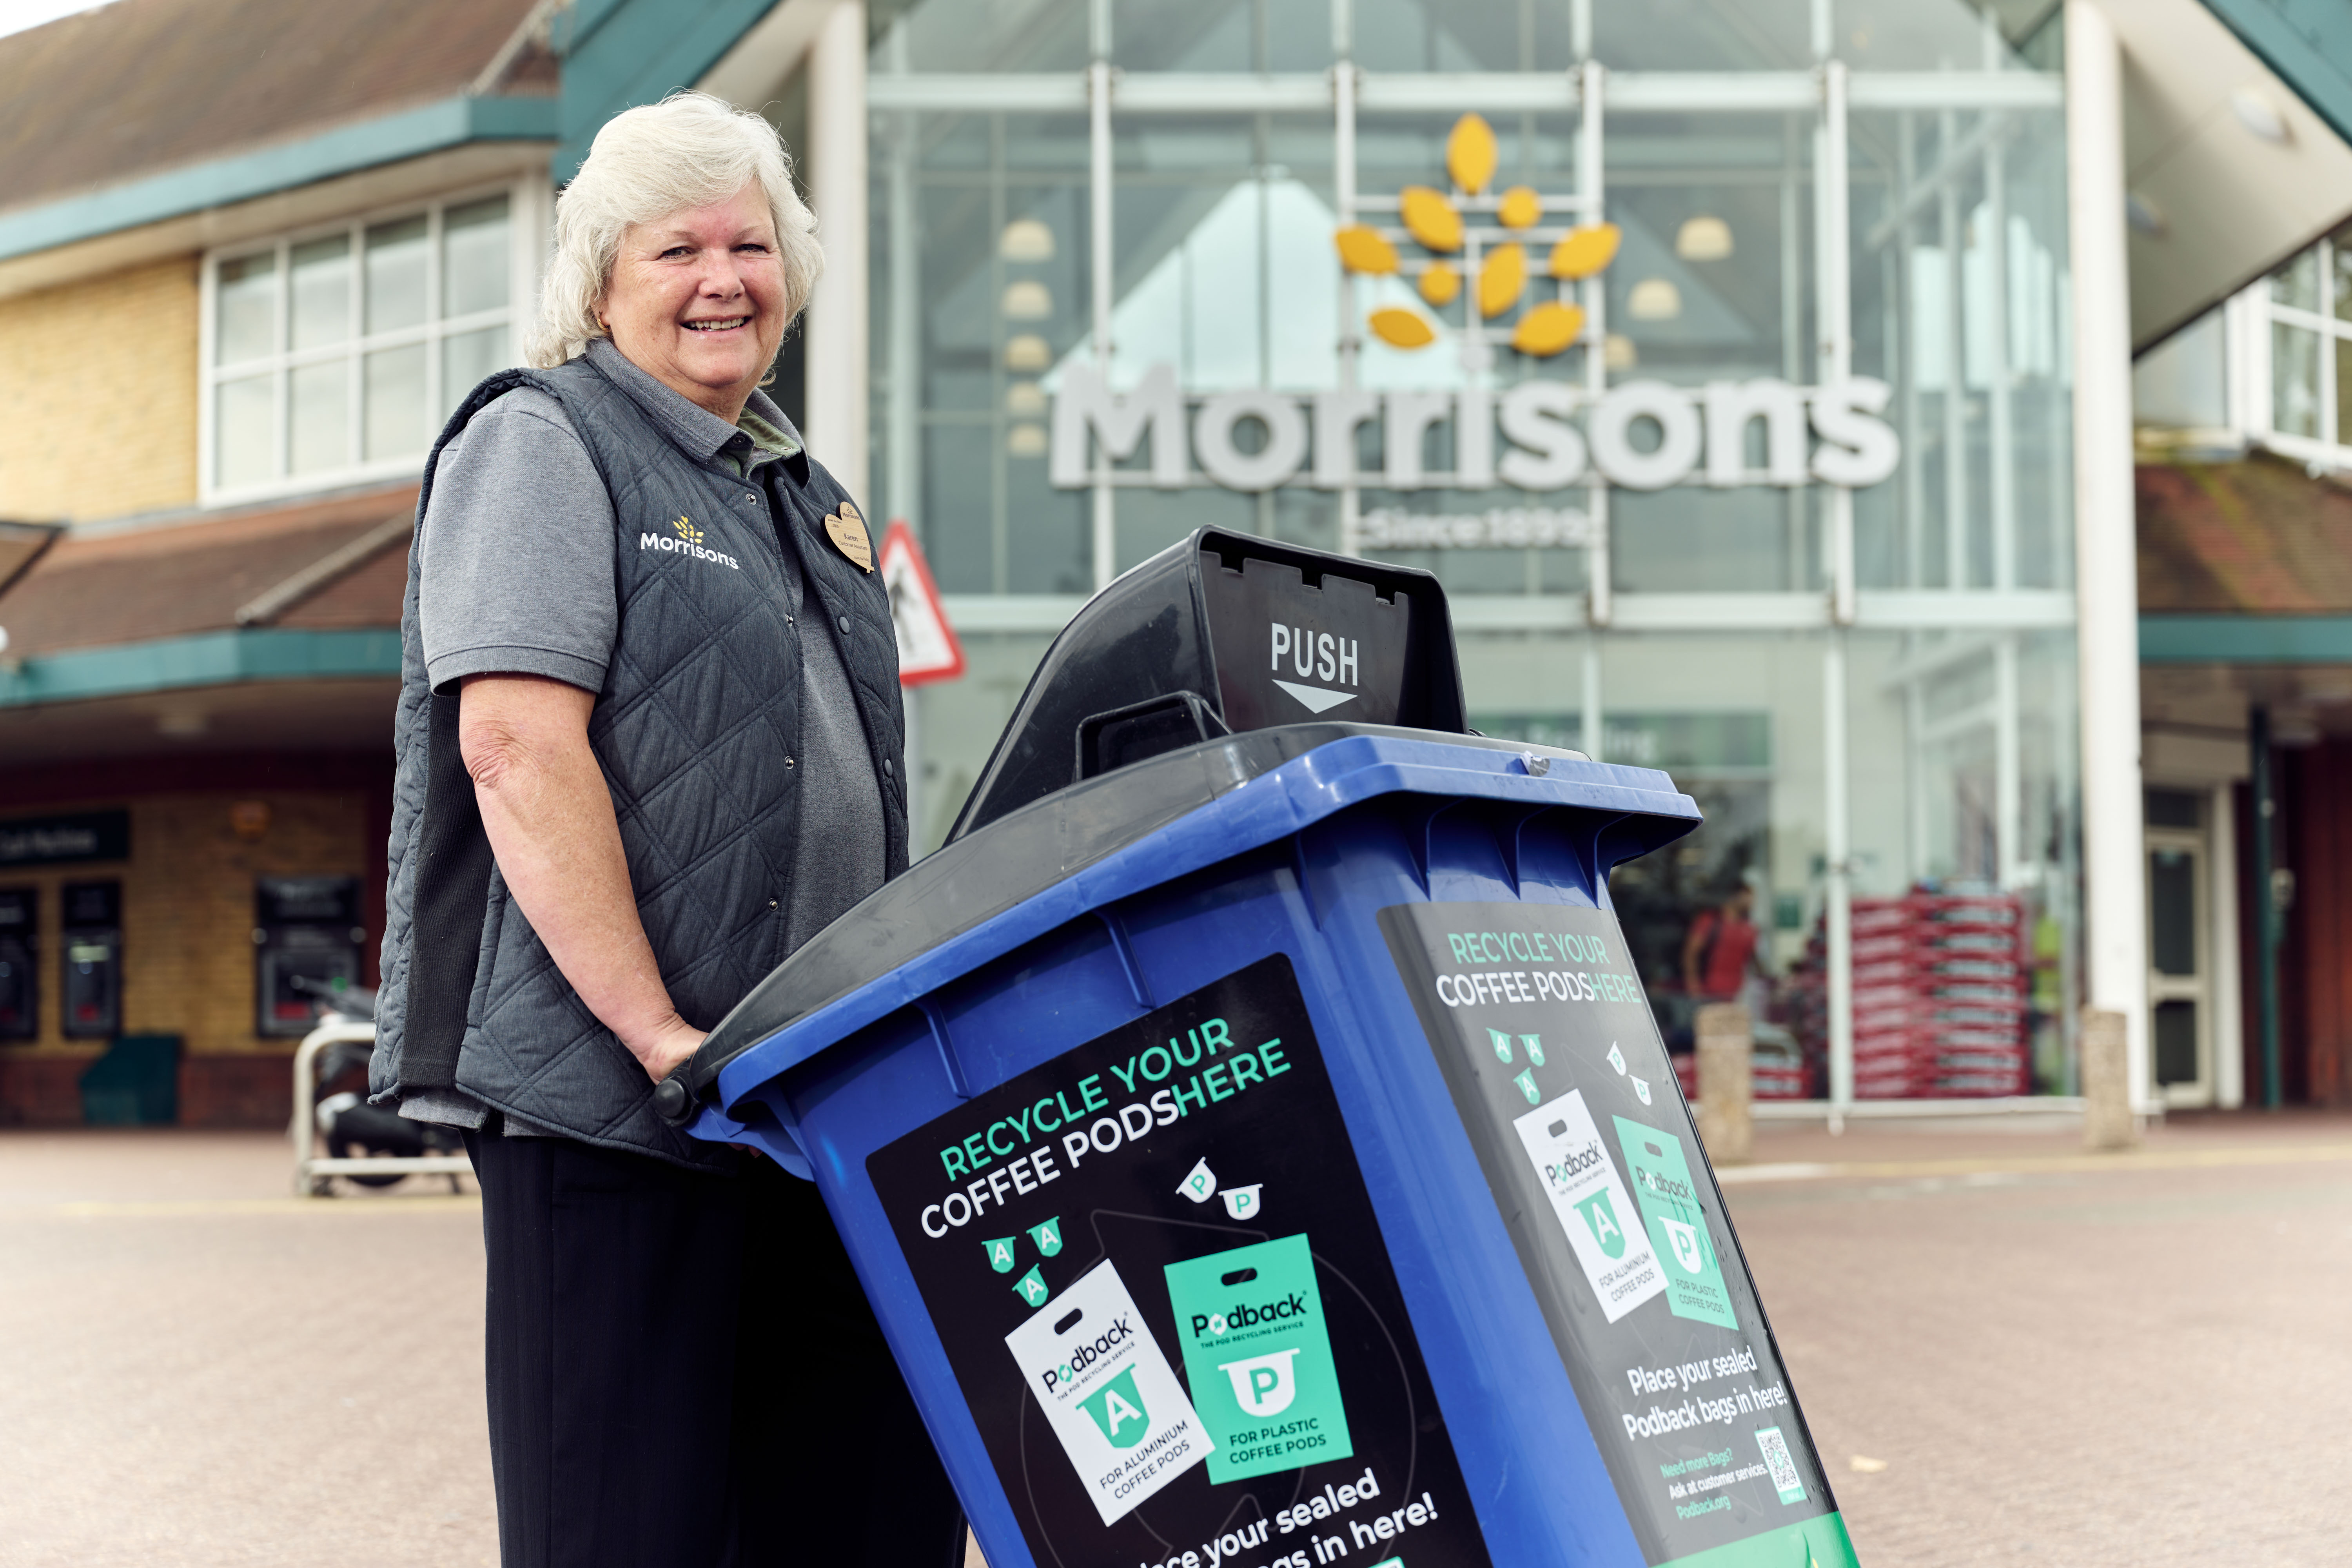 Morrisons becomes first UK supermarket to introduce coffee pod recycling points